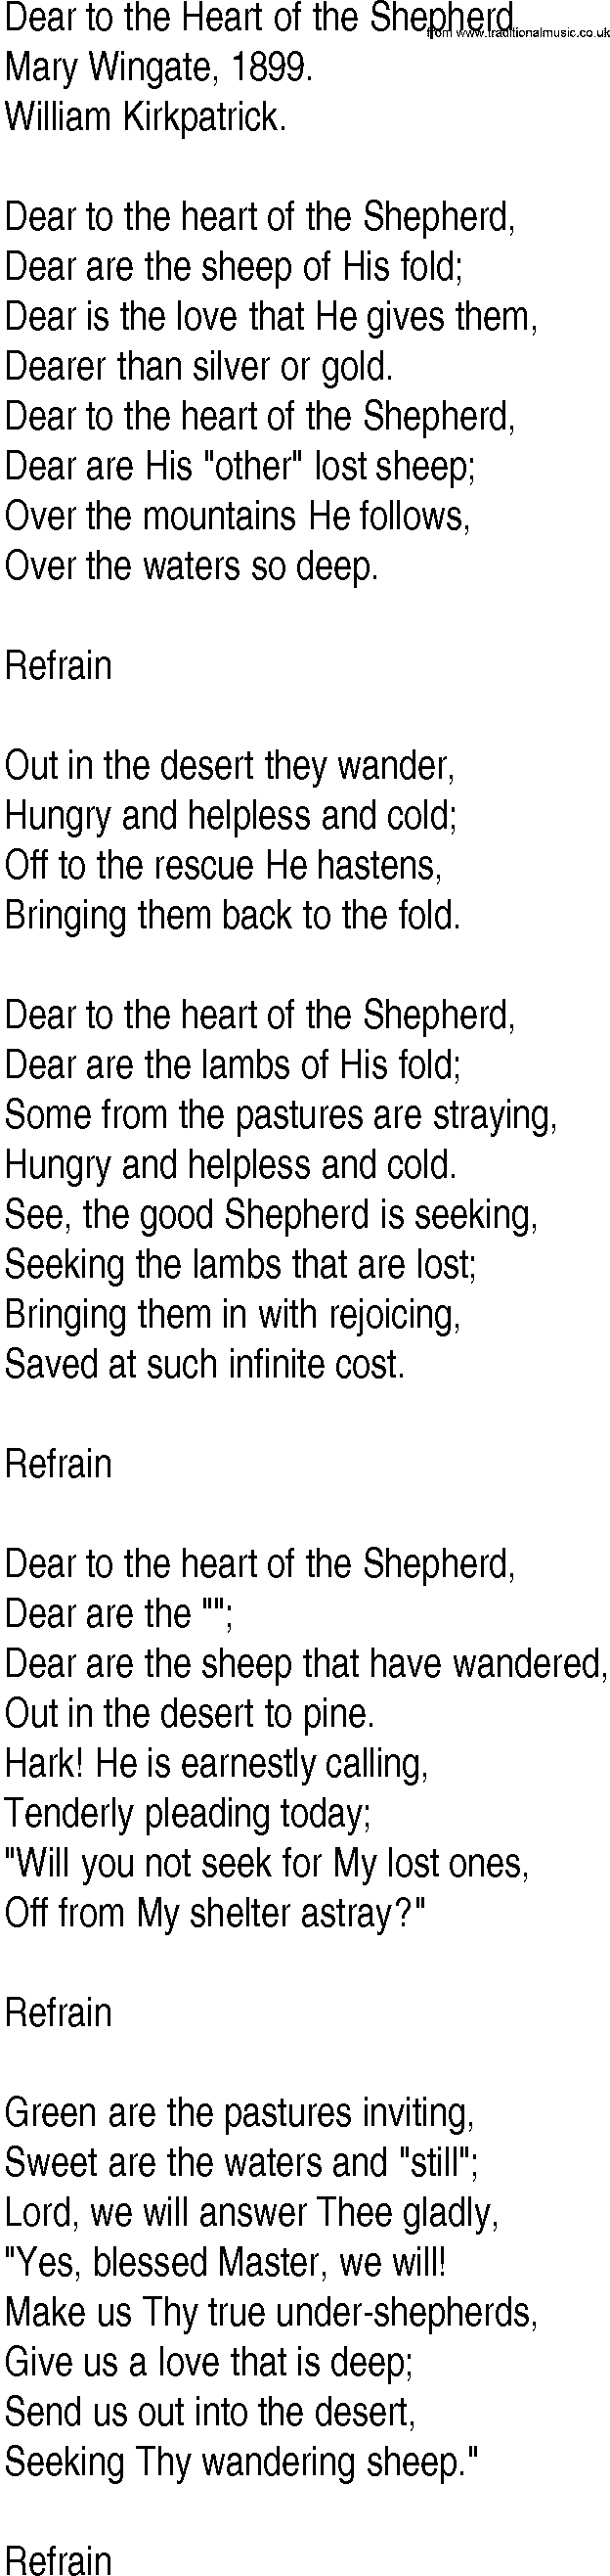 Hymn and Gospel Song: Dear to the Heart of the Shepherd by Mary Wingate lyrics